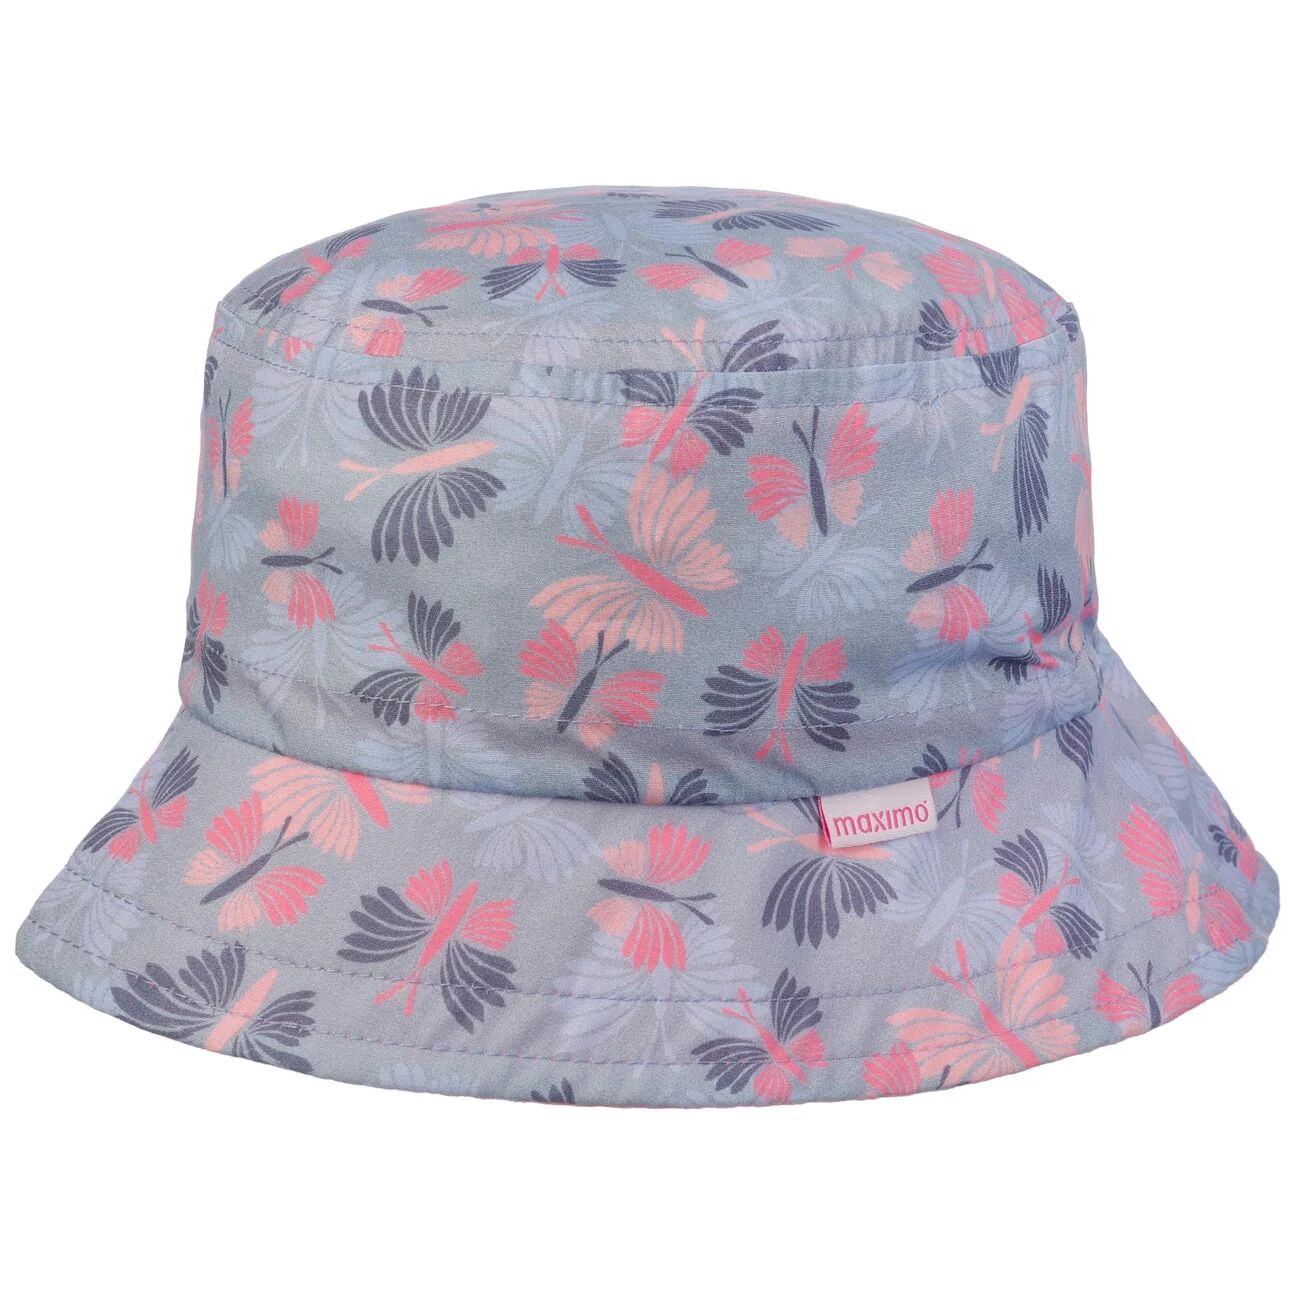 Tricolour Butterflies Girls Cloth Hat by maximo - navy-old rose - Size: 47 cm